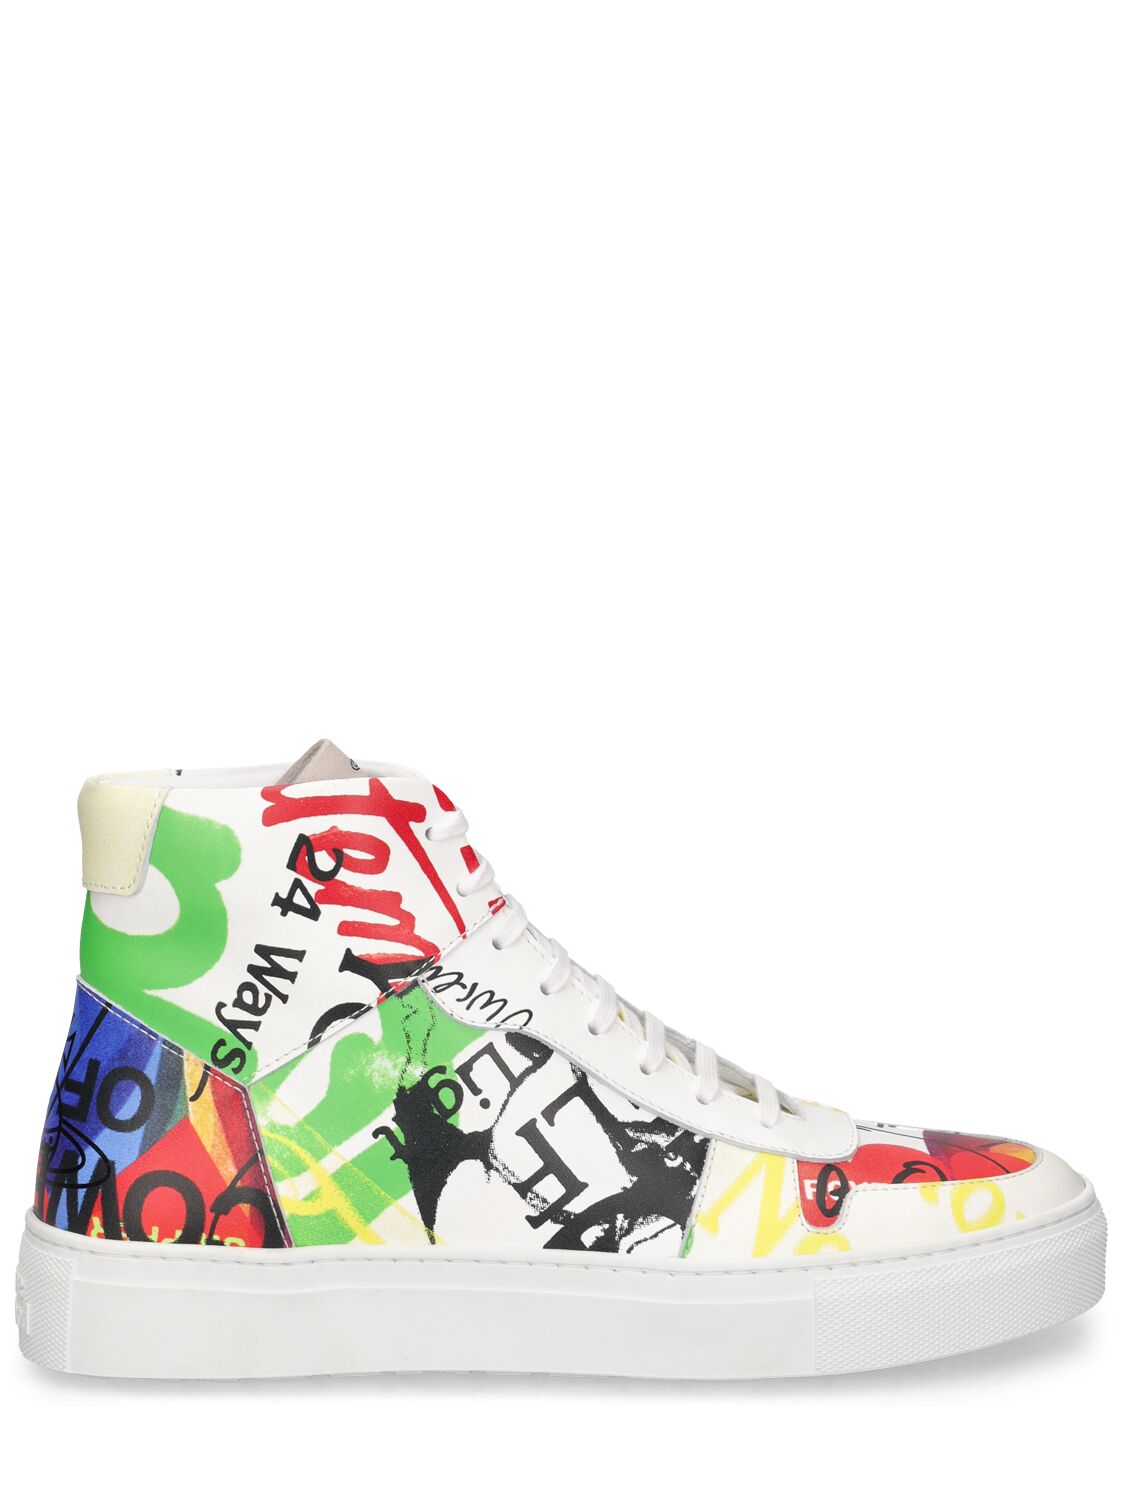 Mm Classic Leather High Top Sneakers - VIVIENNE WESTWOOD - Modalova